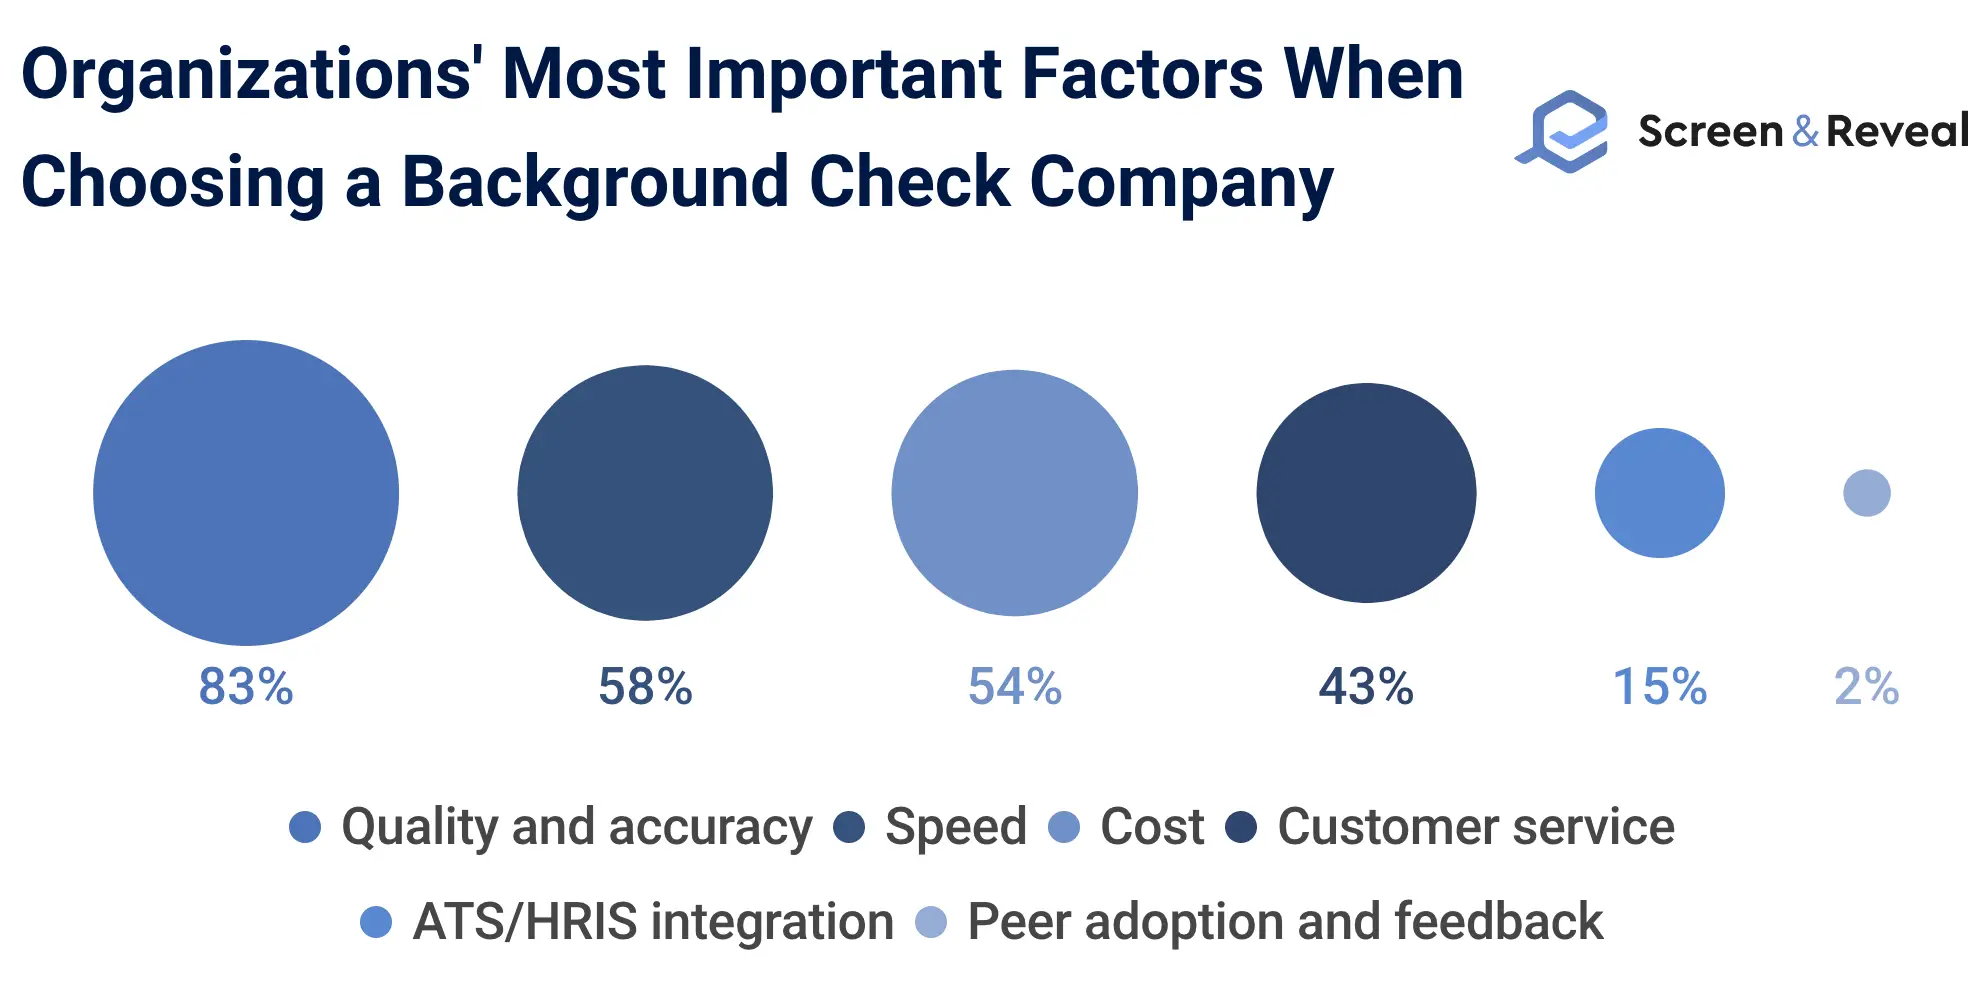 Organizations' Most Important Factors When Choosing a Background Check Company